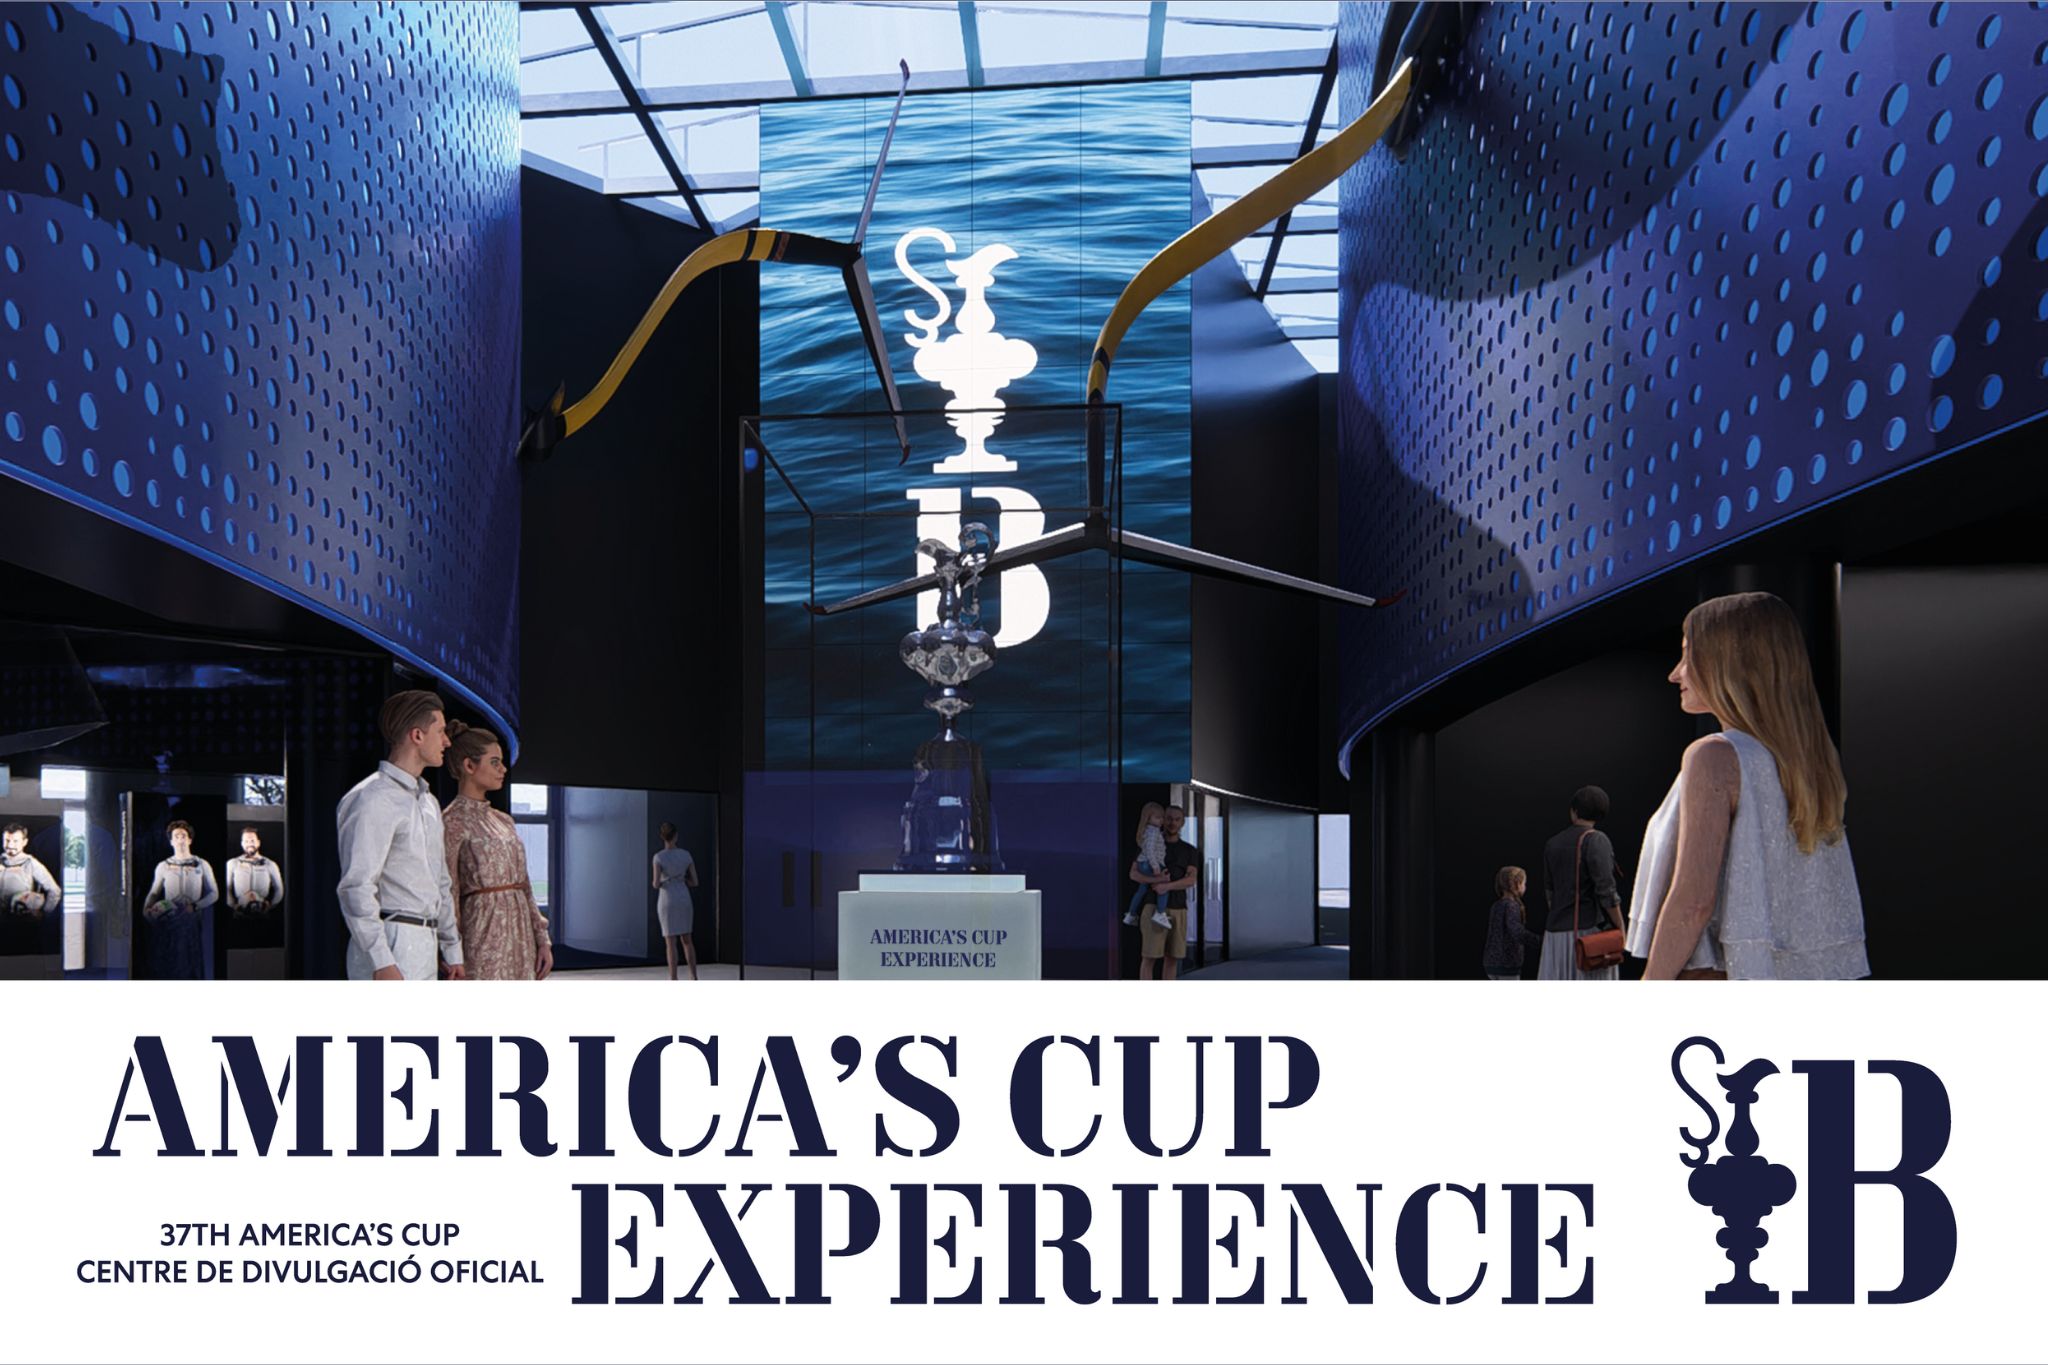 America's cup experience